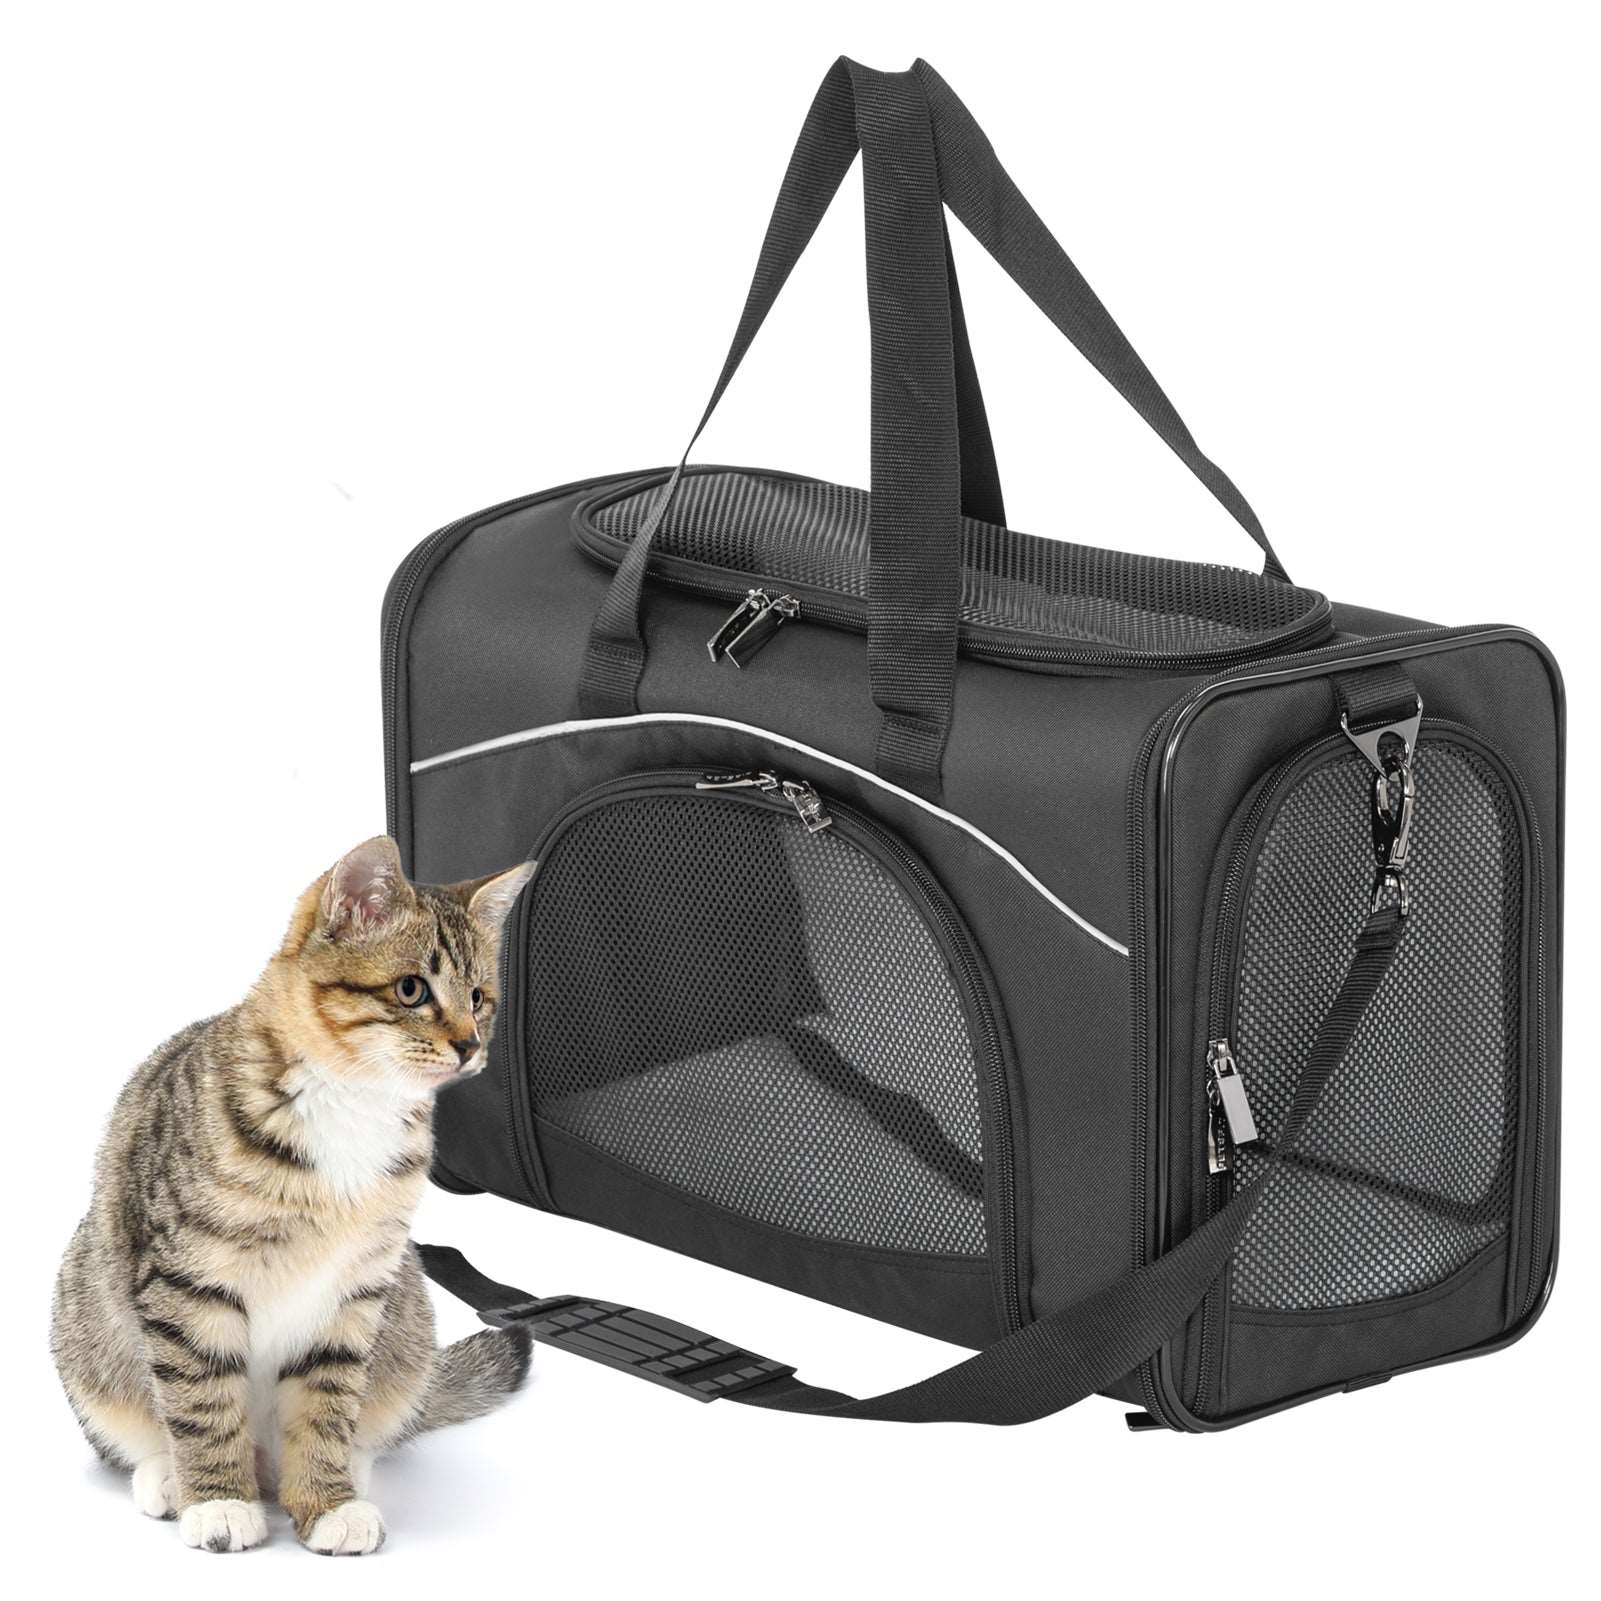 Petsfit-Pet-Carrier-Airline-Approved-01